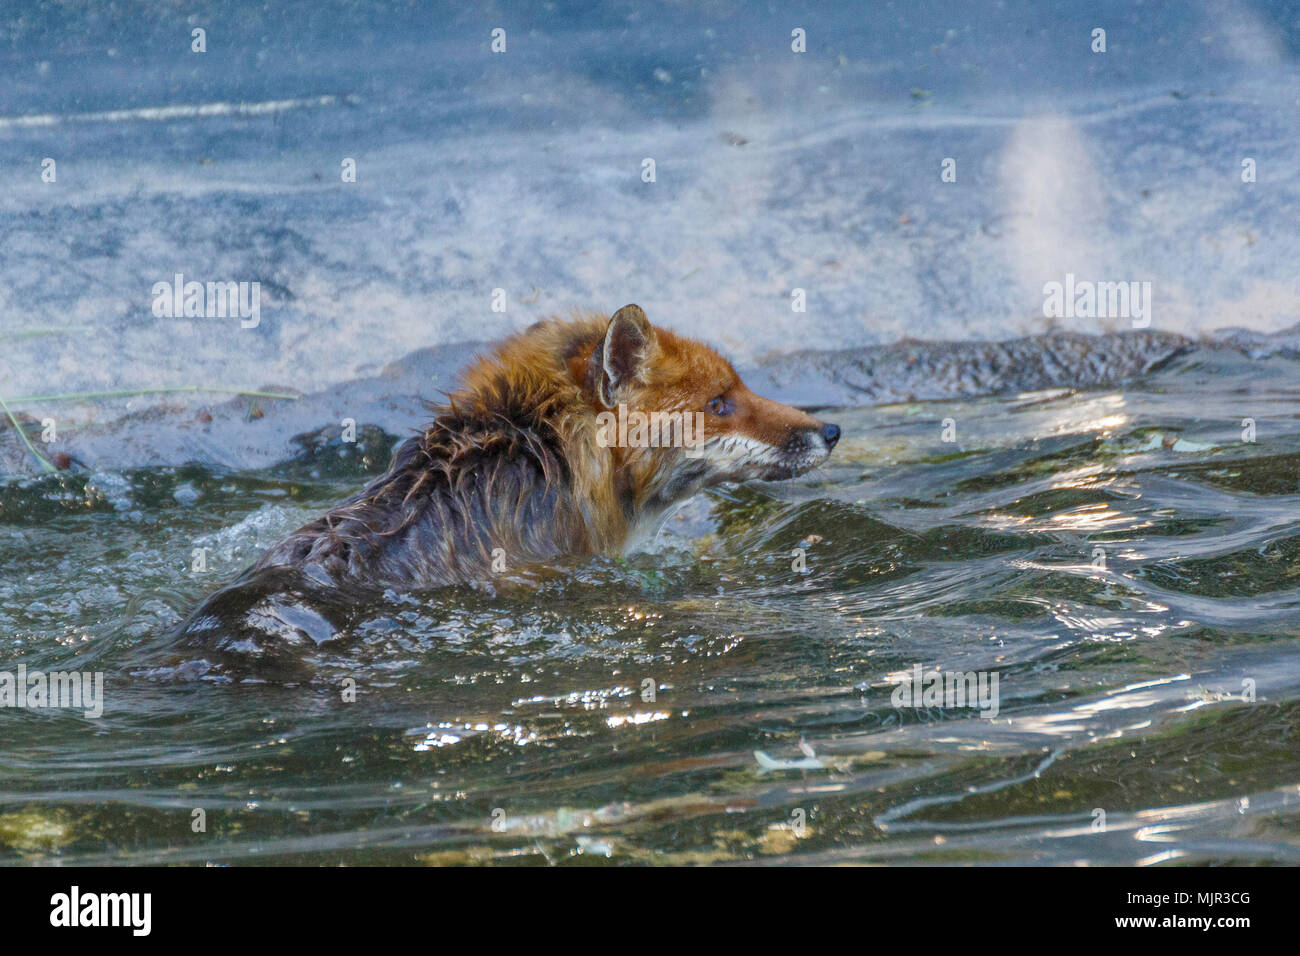 Oelsnitz, Germany, 06 May 2018. A fox swimming at the edge of an irrigation pool. Since the pool is currently not completely full, the fox was unable to climb out over the smooth pond liner. The fox was rescued by two firefighters in a rubber dinghy. Photo: Jens Uhlig/Jens Uhlig/dpa Credit: dpa picture alliance/Alamy Live News Stock Photo